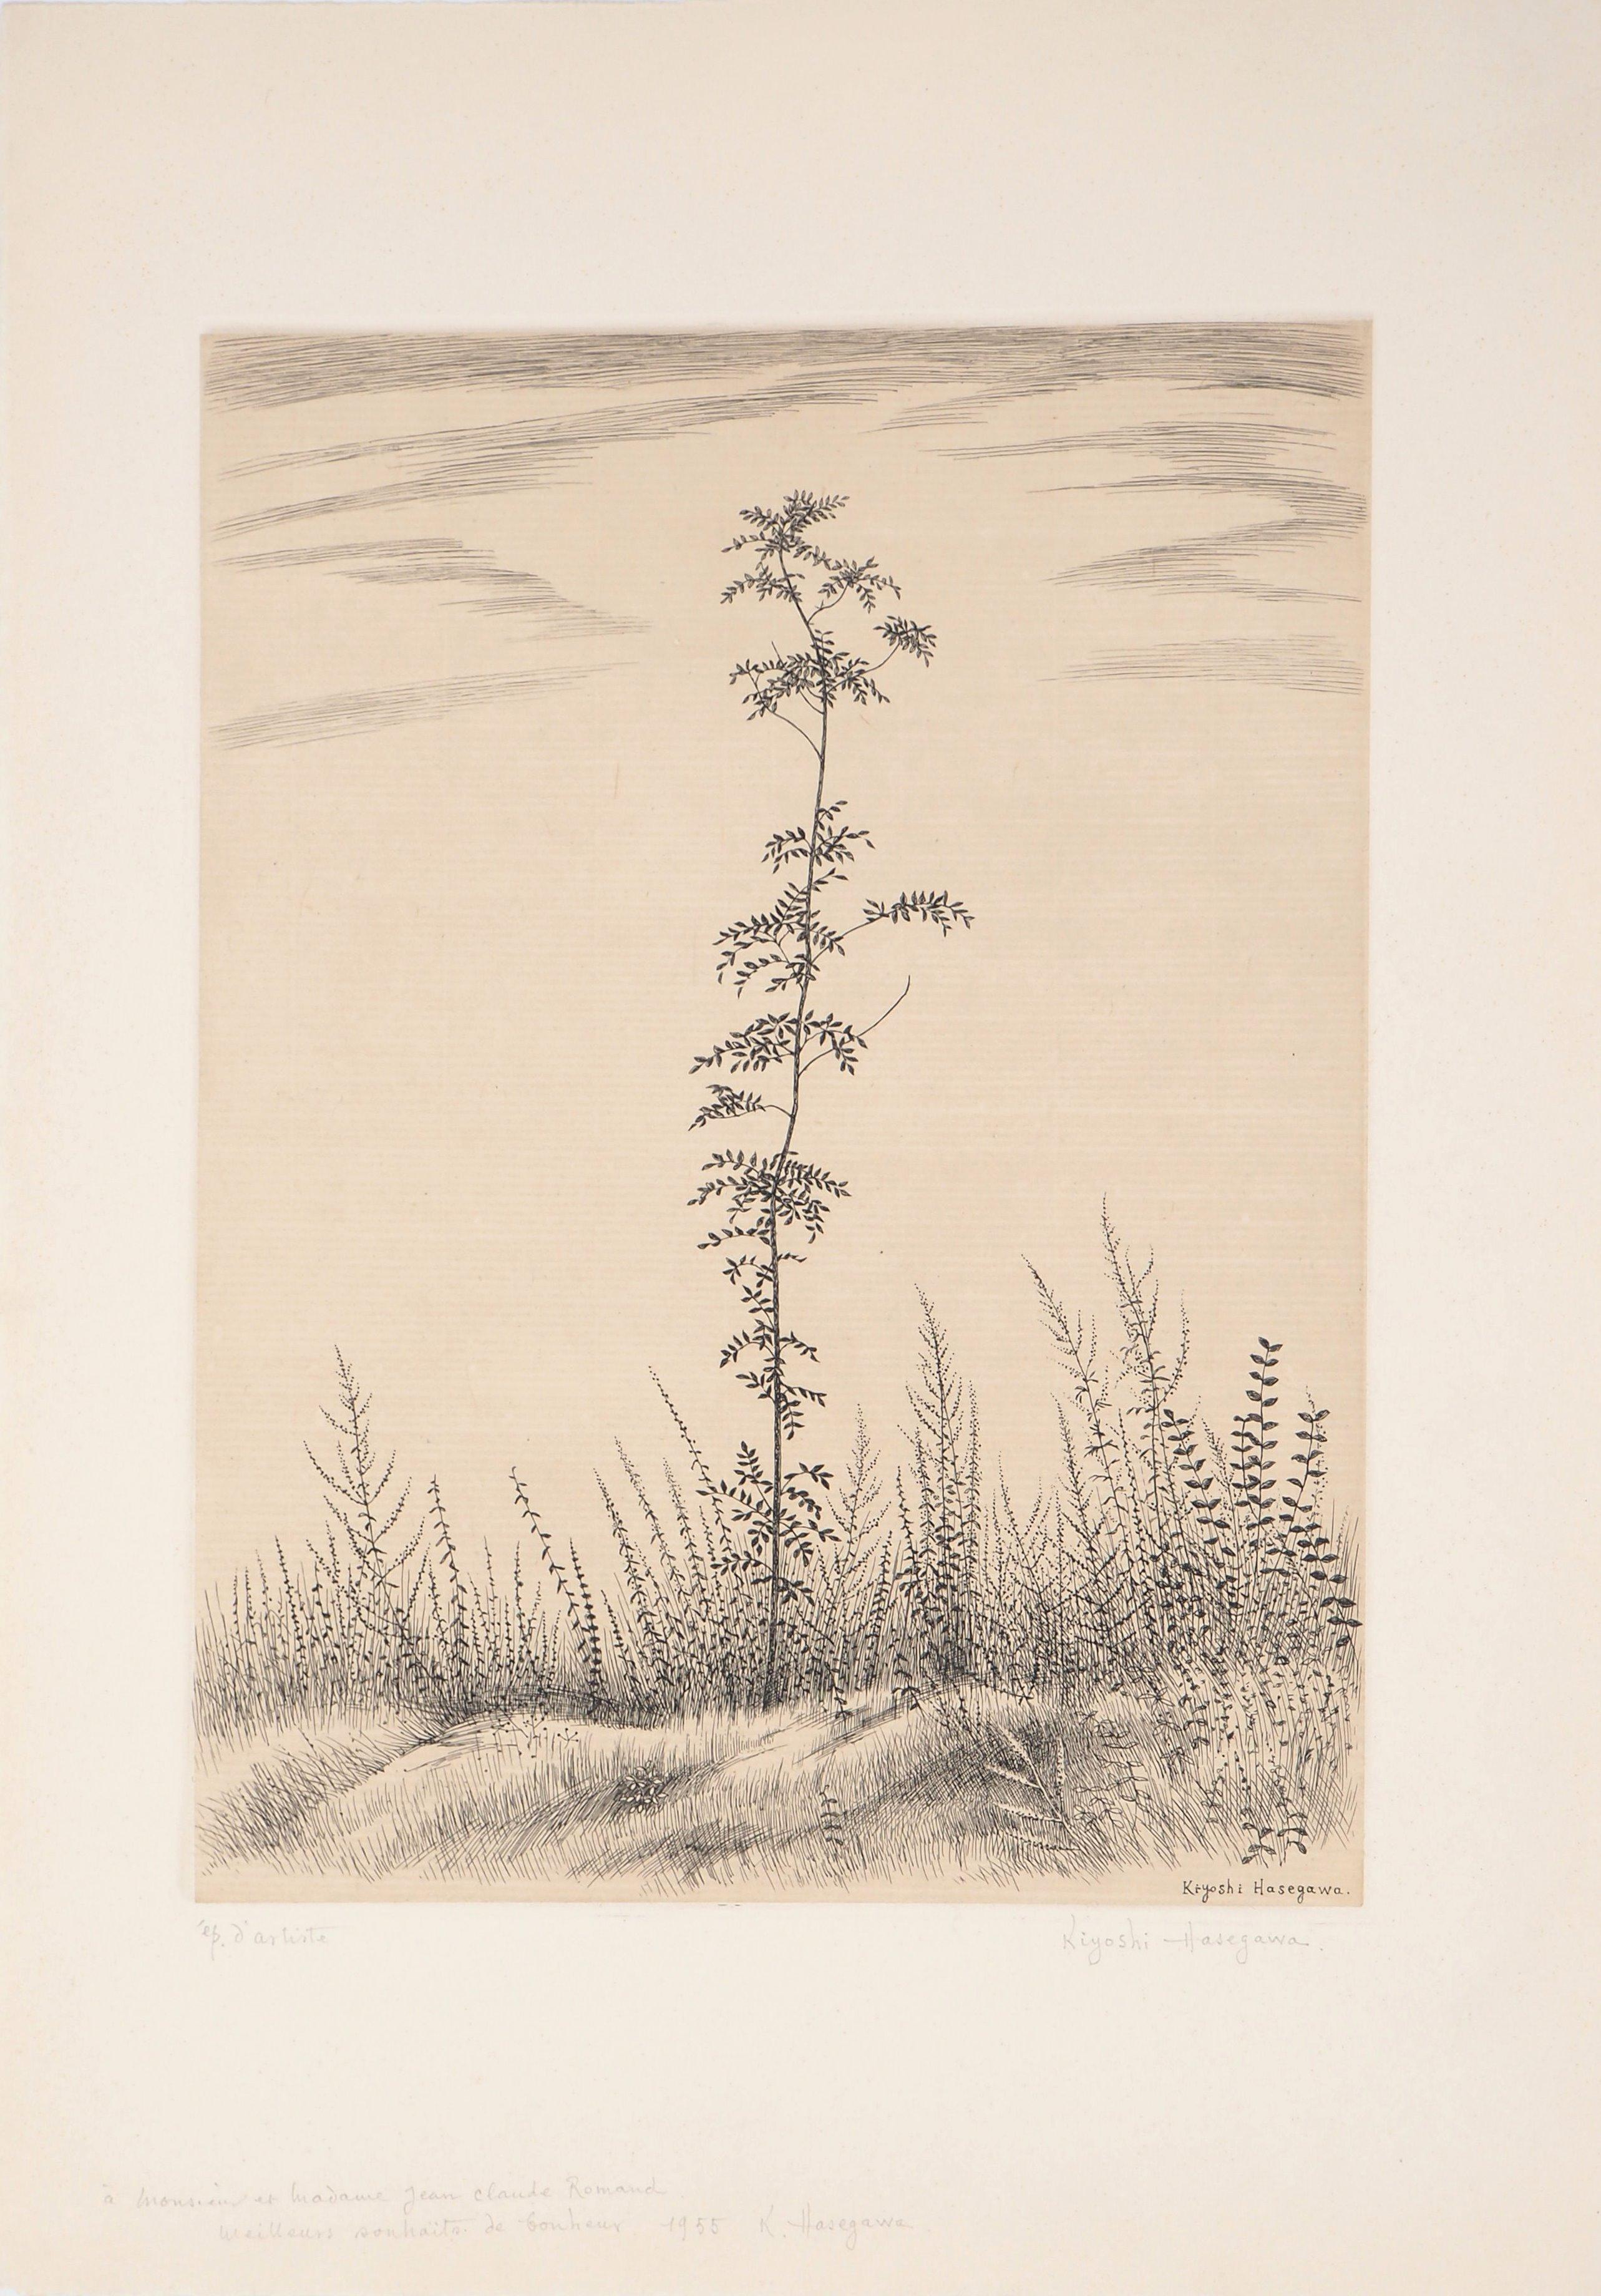 A Young Tree  - Original handsigned etching, Limited to 50 copies, 1953 - Print by Kiyoshi Hasegawa